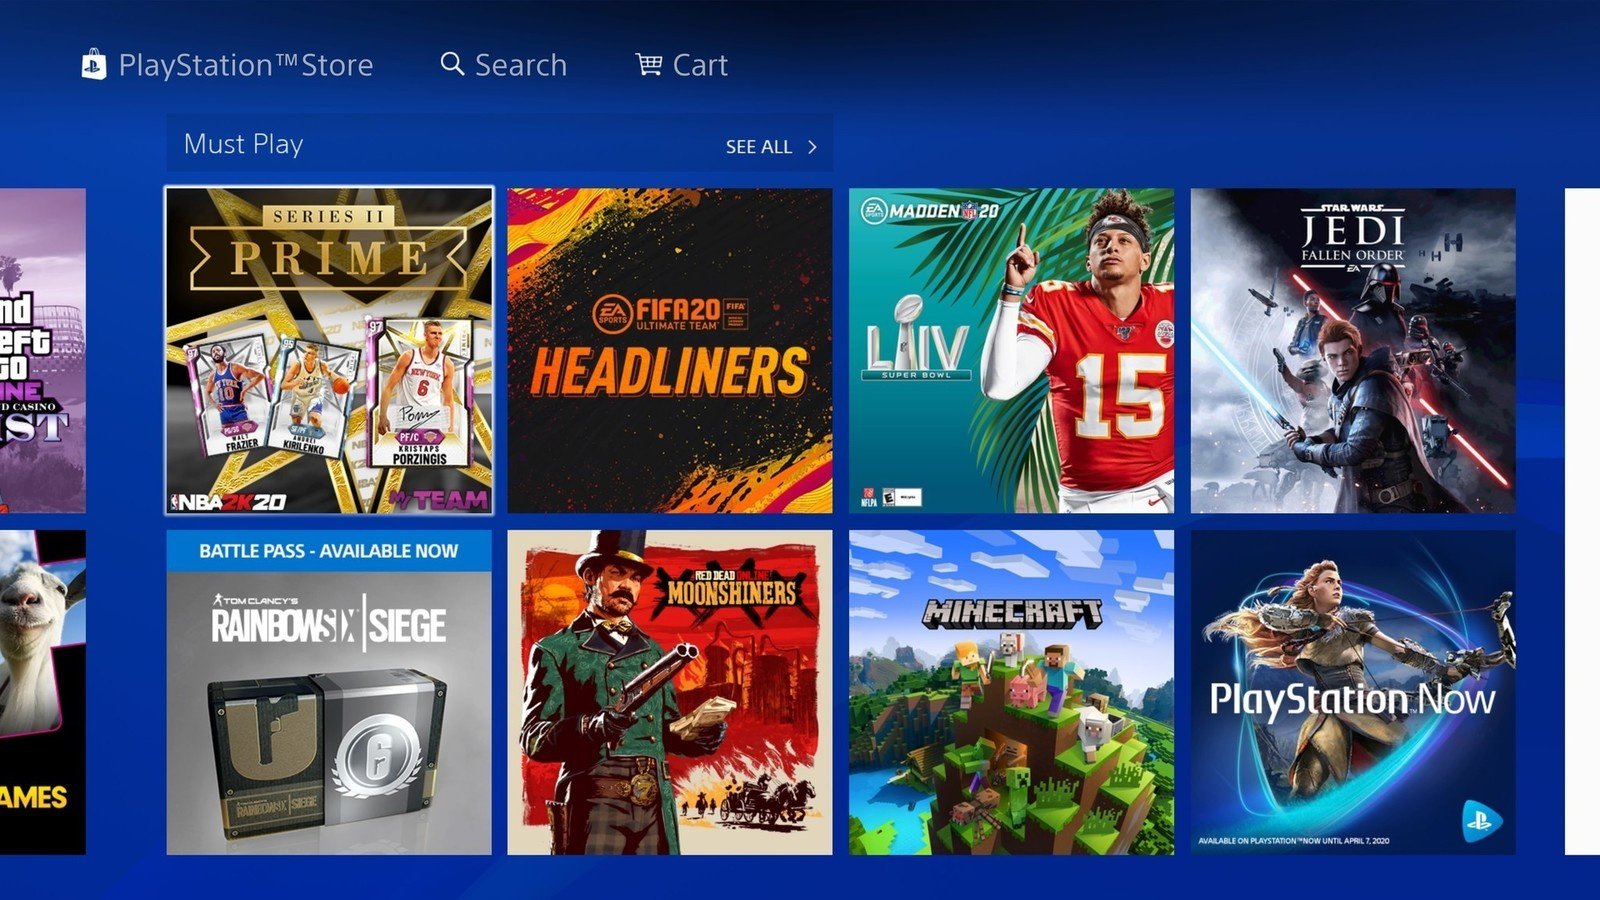 how much is gta 5 on the ps4 store